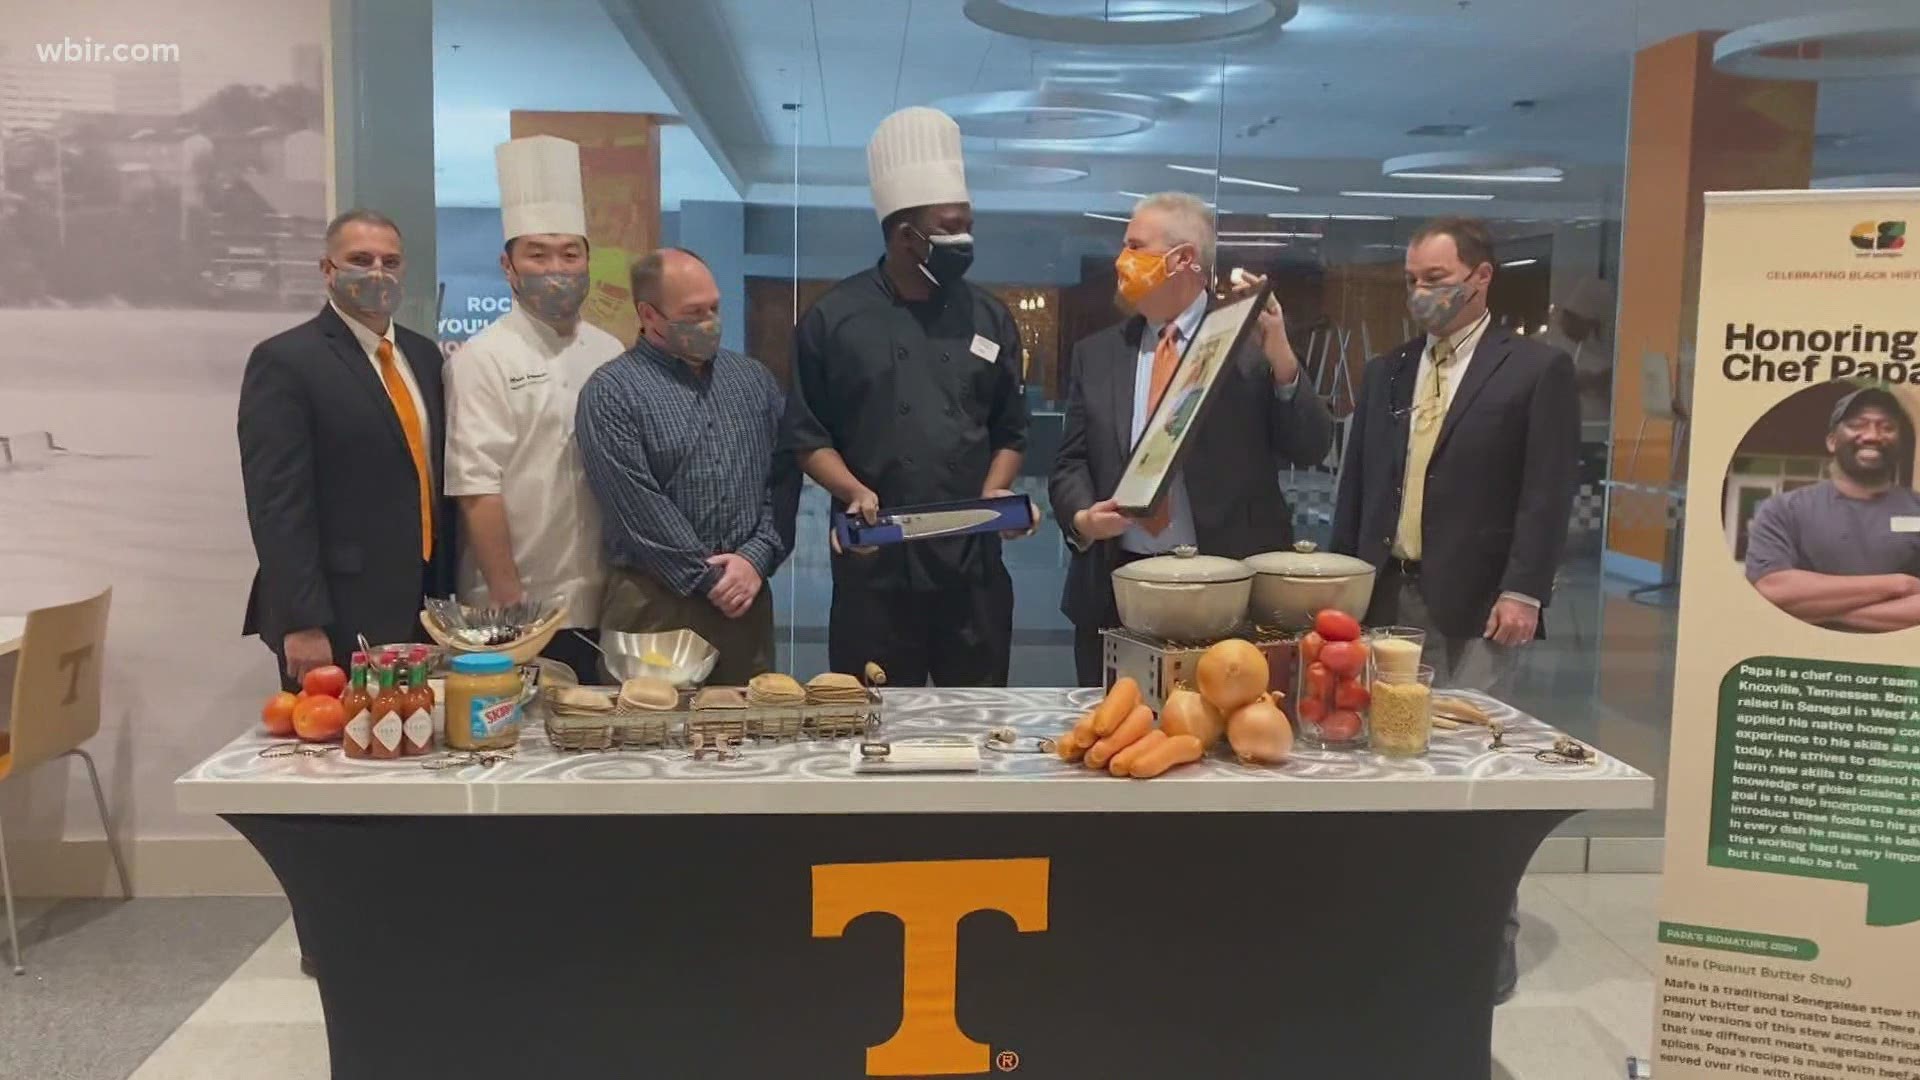 Chef Papa at the University of Tennessee has won a national award for his cooking. March 31, 2021-4pm.